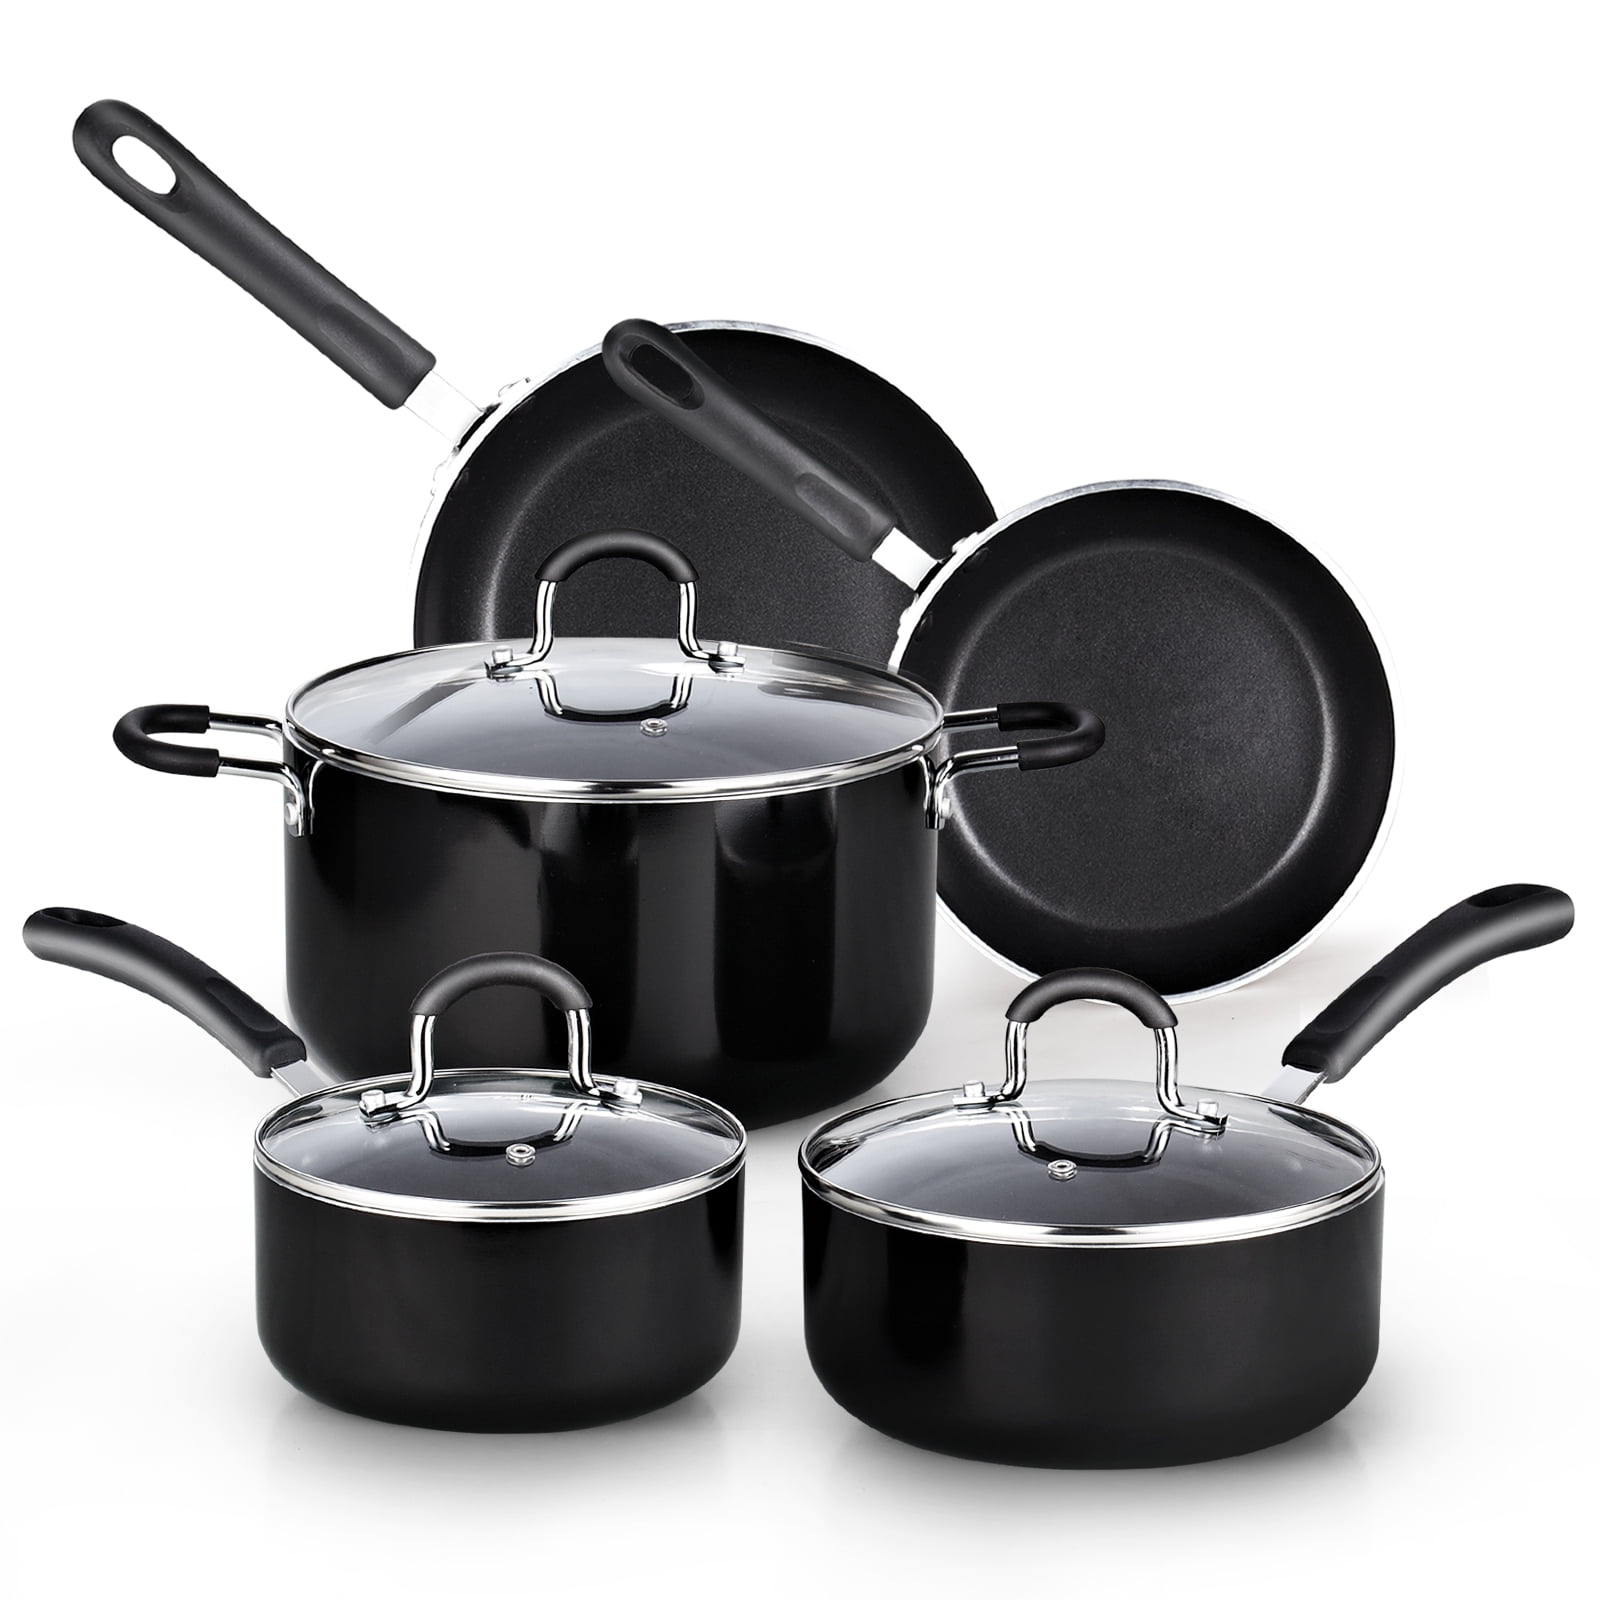 Carote 12 Piece Nonstick Cookware Sets, Heavy-duty Pots and Pans Set,  Induction Kitchen Cooking Set & Reviews